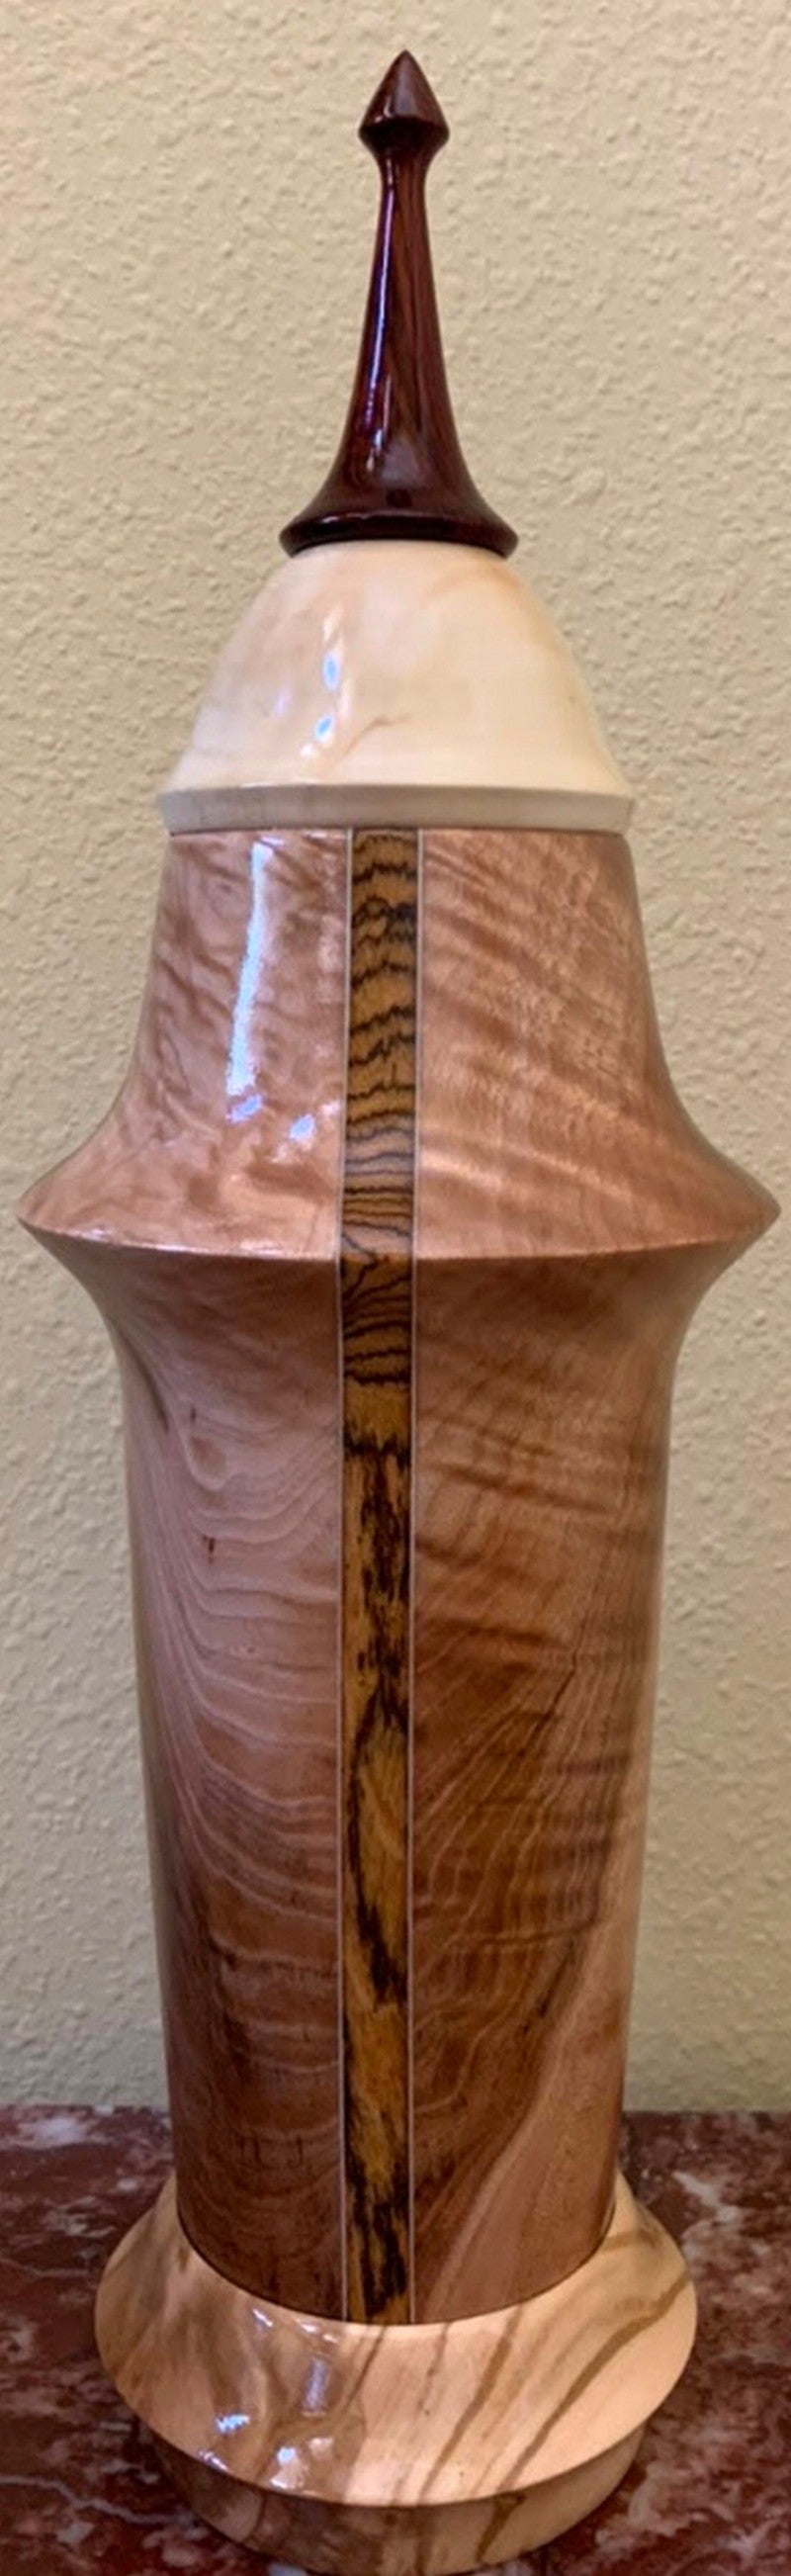 Vessel Blank in Figured Maple, Bocote Inlay, and Rosewood Finial